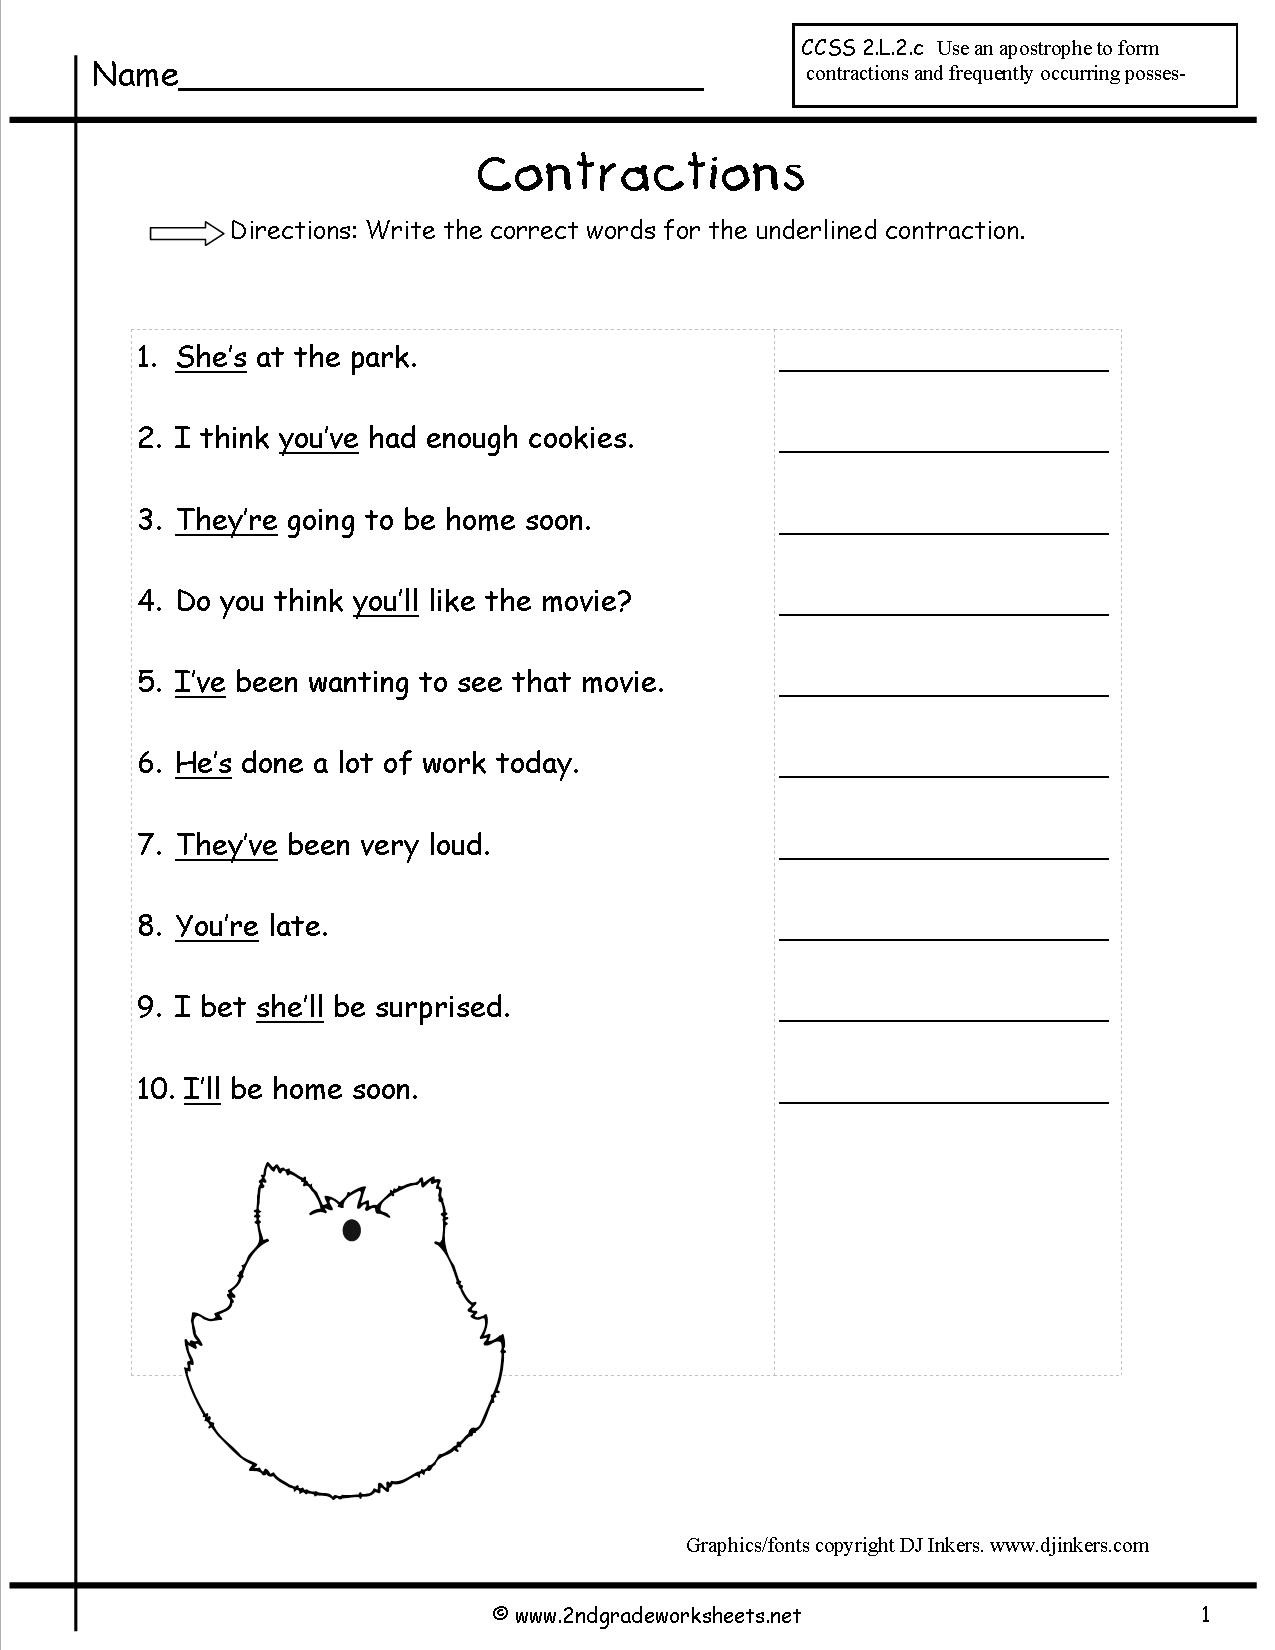 Contractions Worksheet 2nd Grade Free Contractions Worksheets and Printouts Contraction 3rd